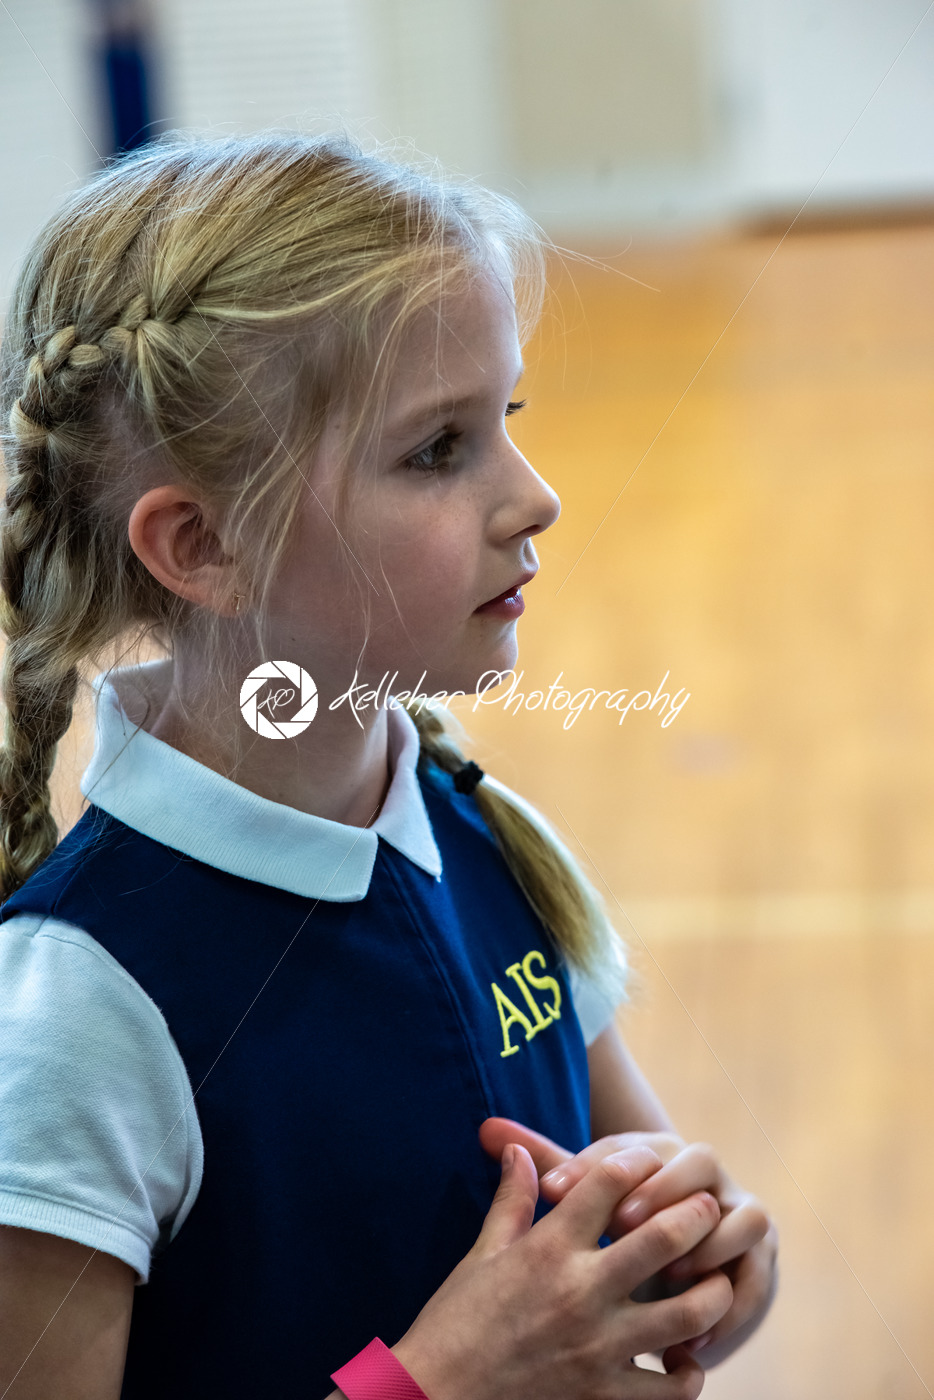 ROSEMONT, PA – MAY 15, 2019: Lower school 4th grade region fair at The Agnes Irwin School - Kelleher Photography Store